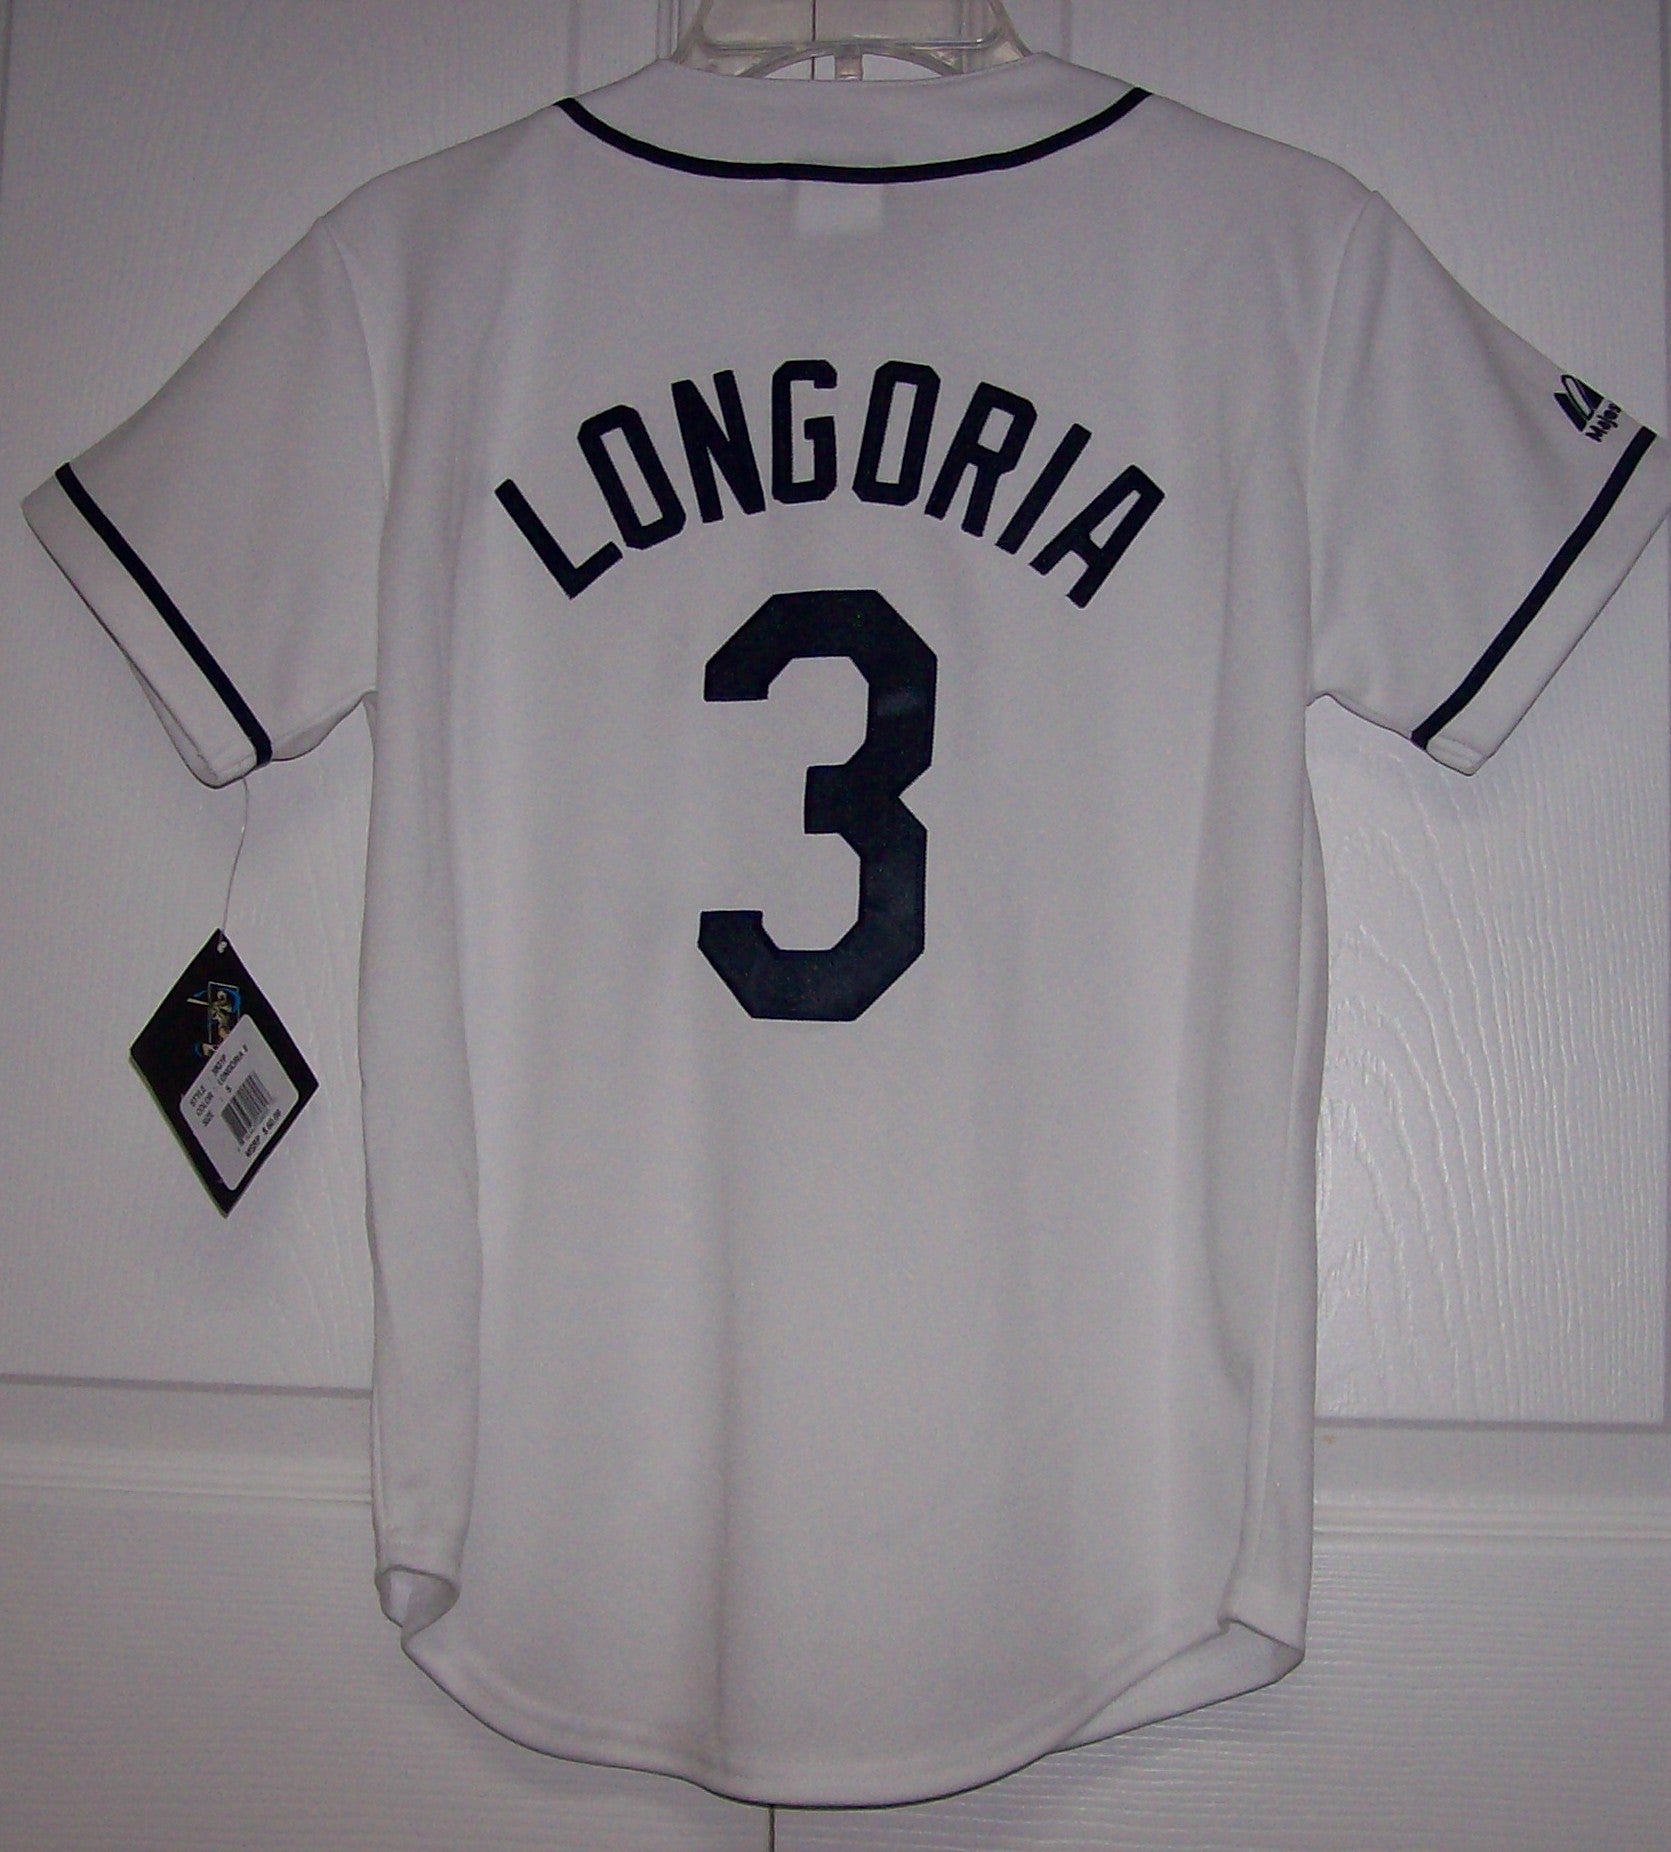 tampa bay rays youth jersey